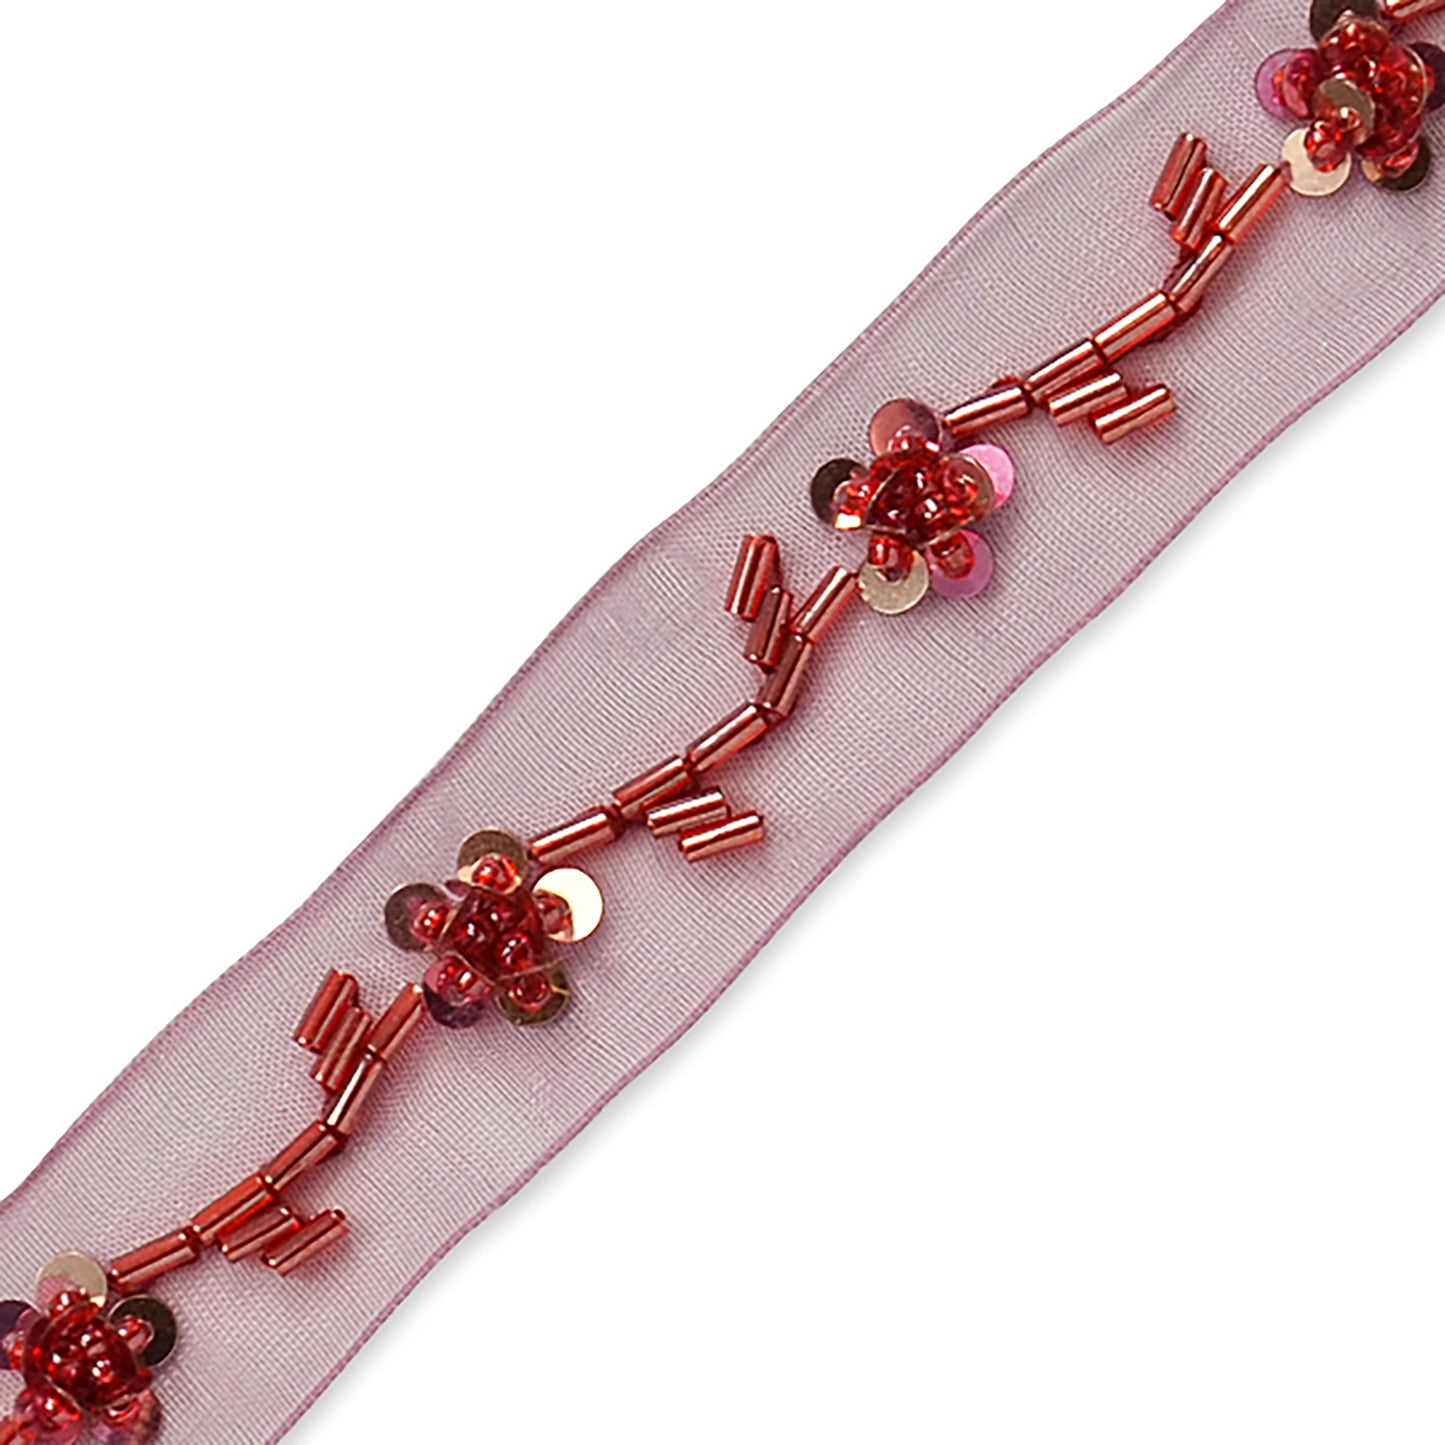 Beaded Sequin Vine Trim (3/4") (Sold by the Yard)